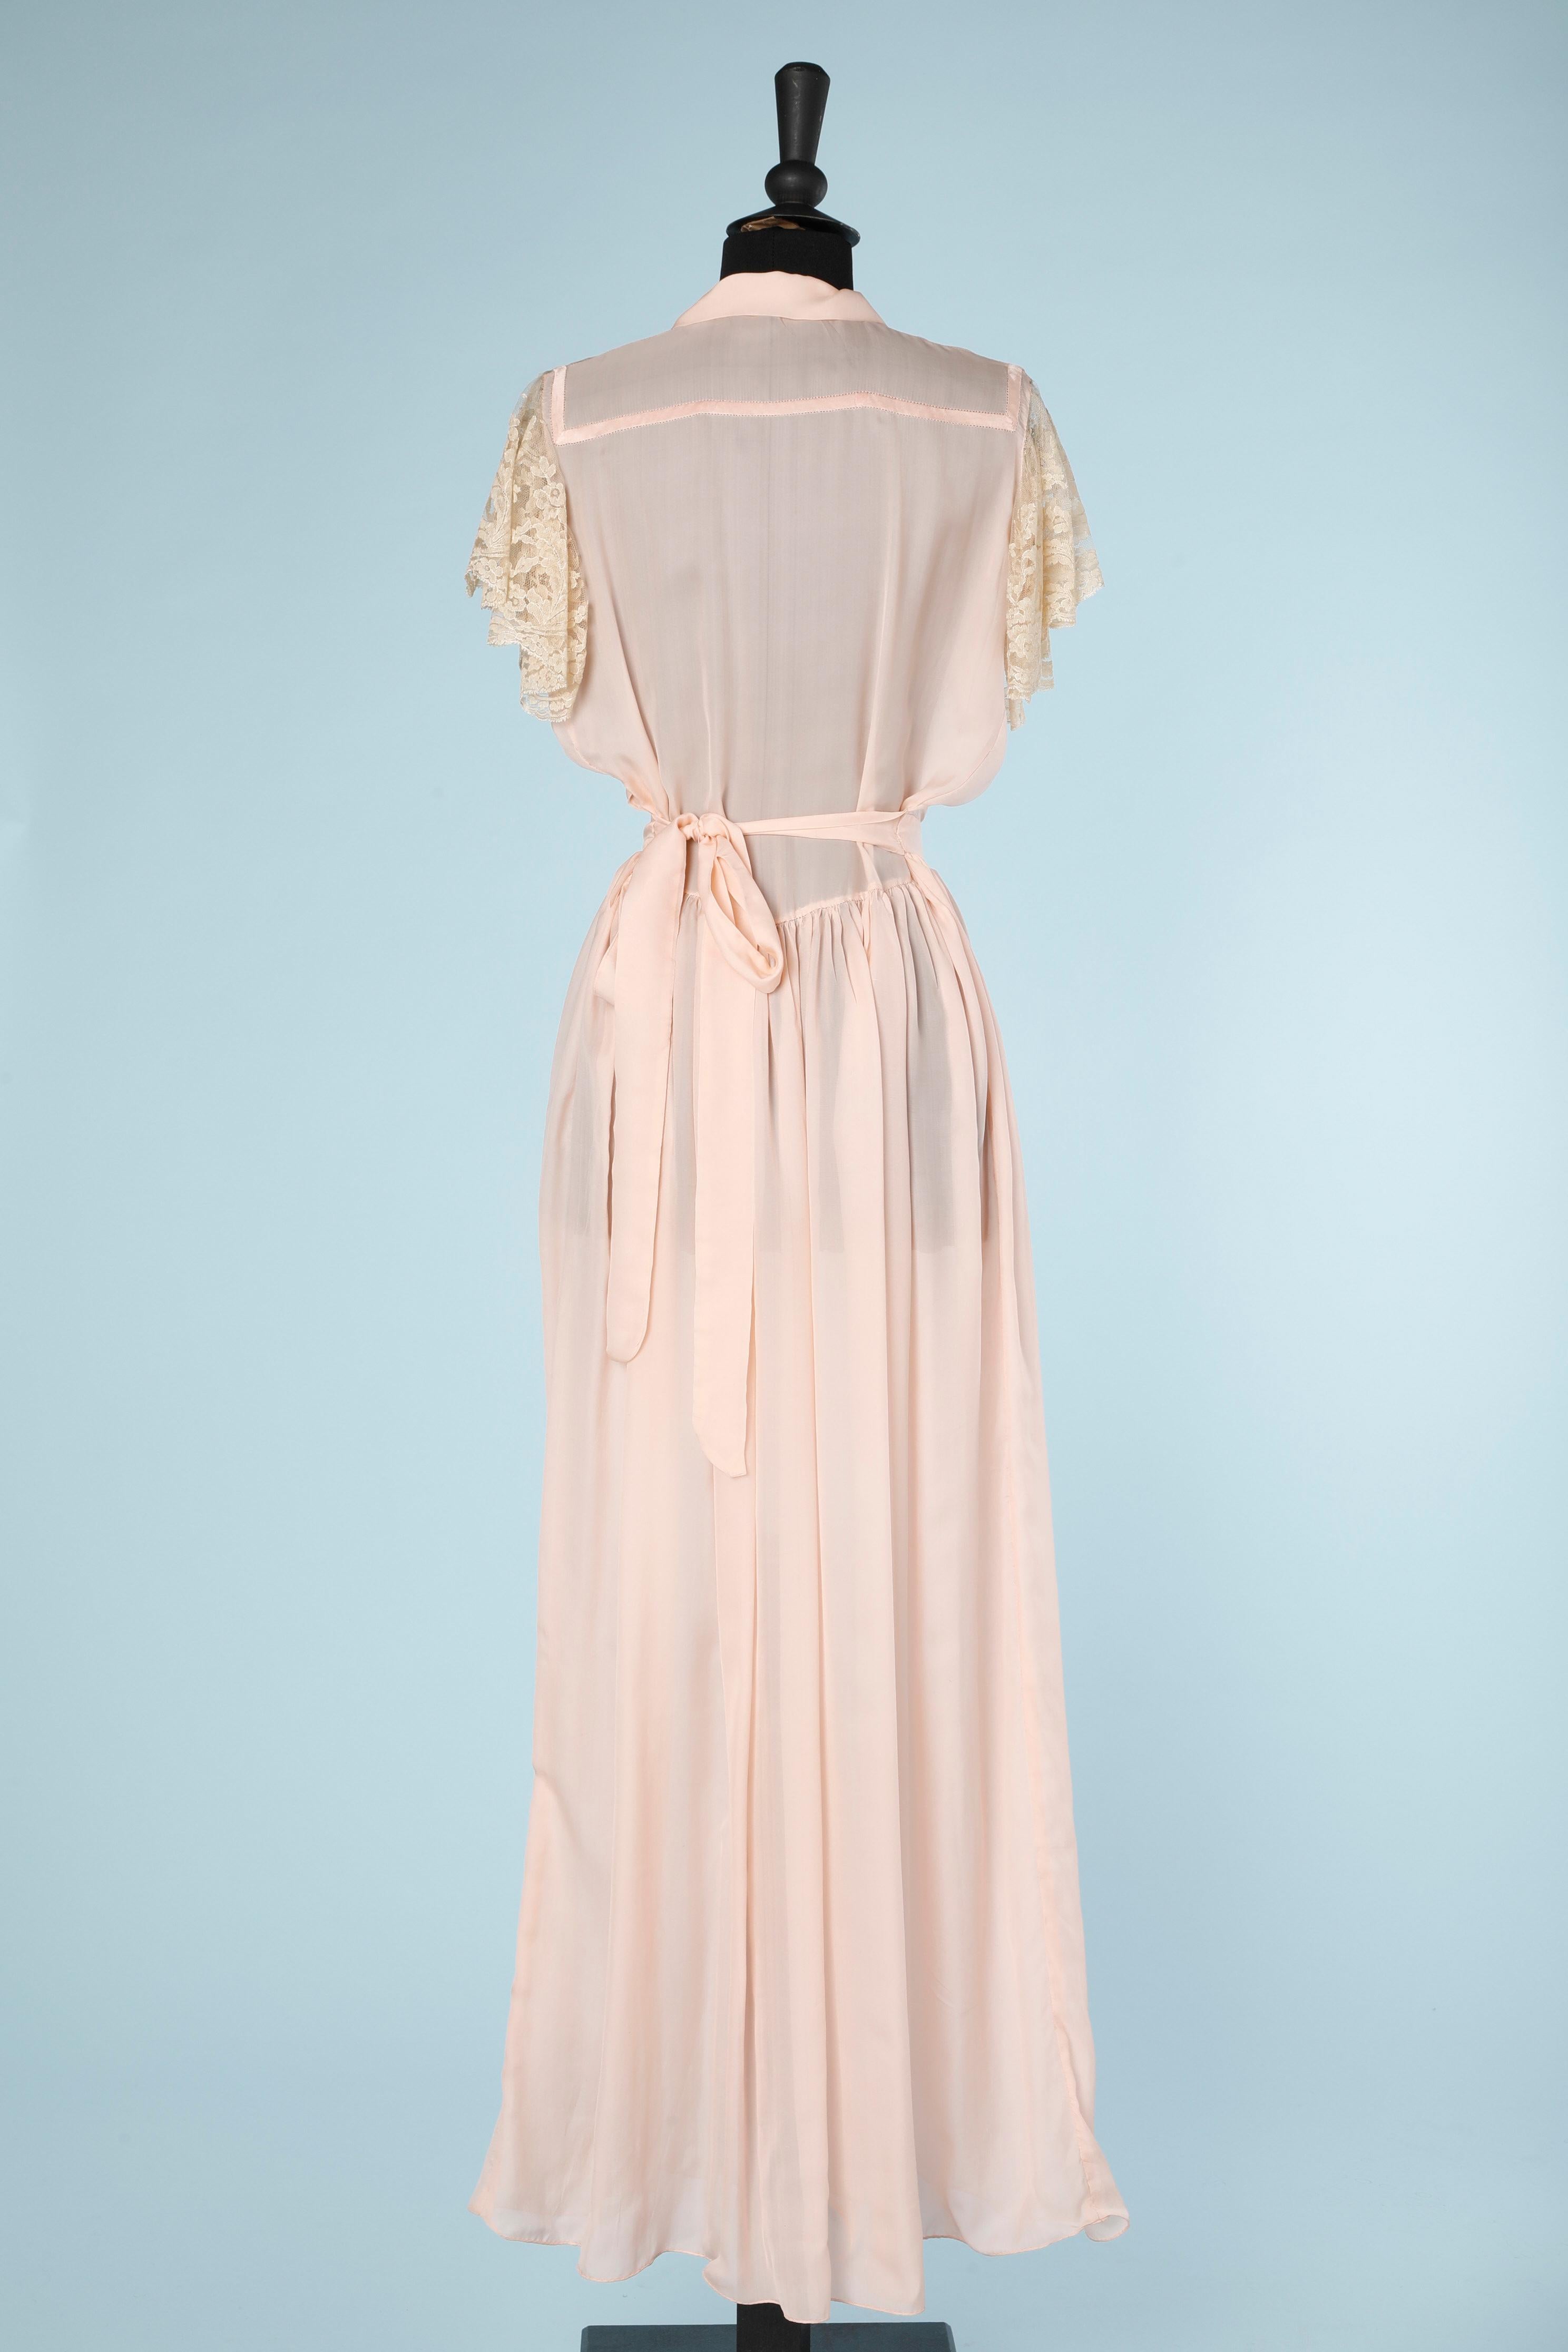 Women's 1930's deshabillé in pale pink silk and lace 